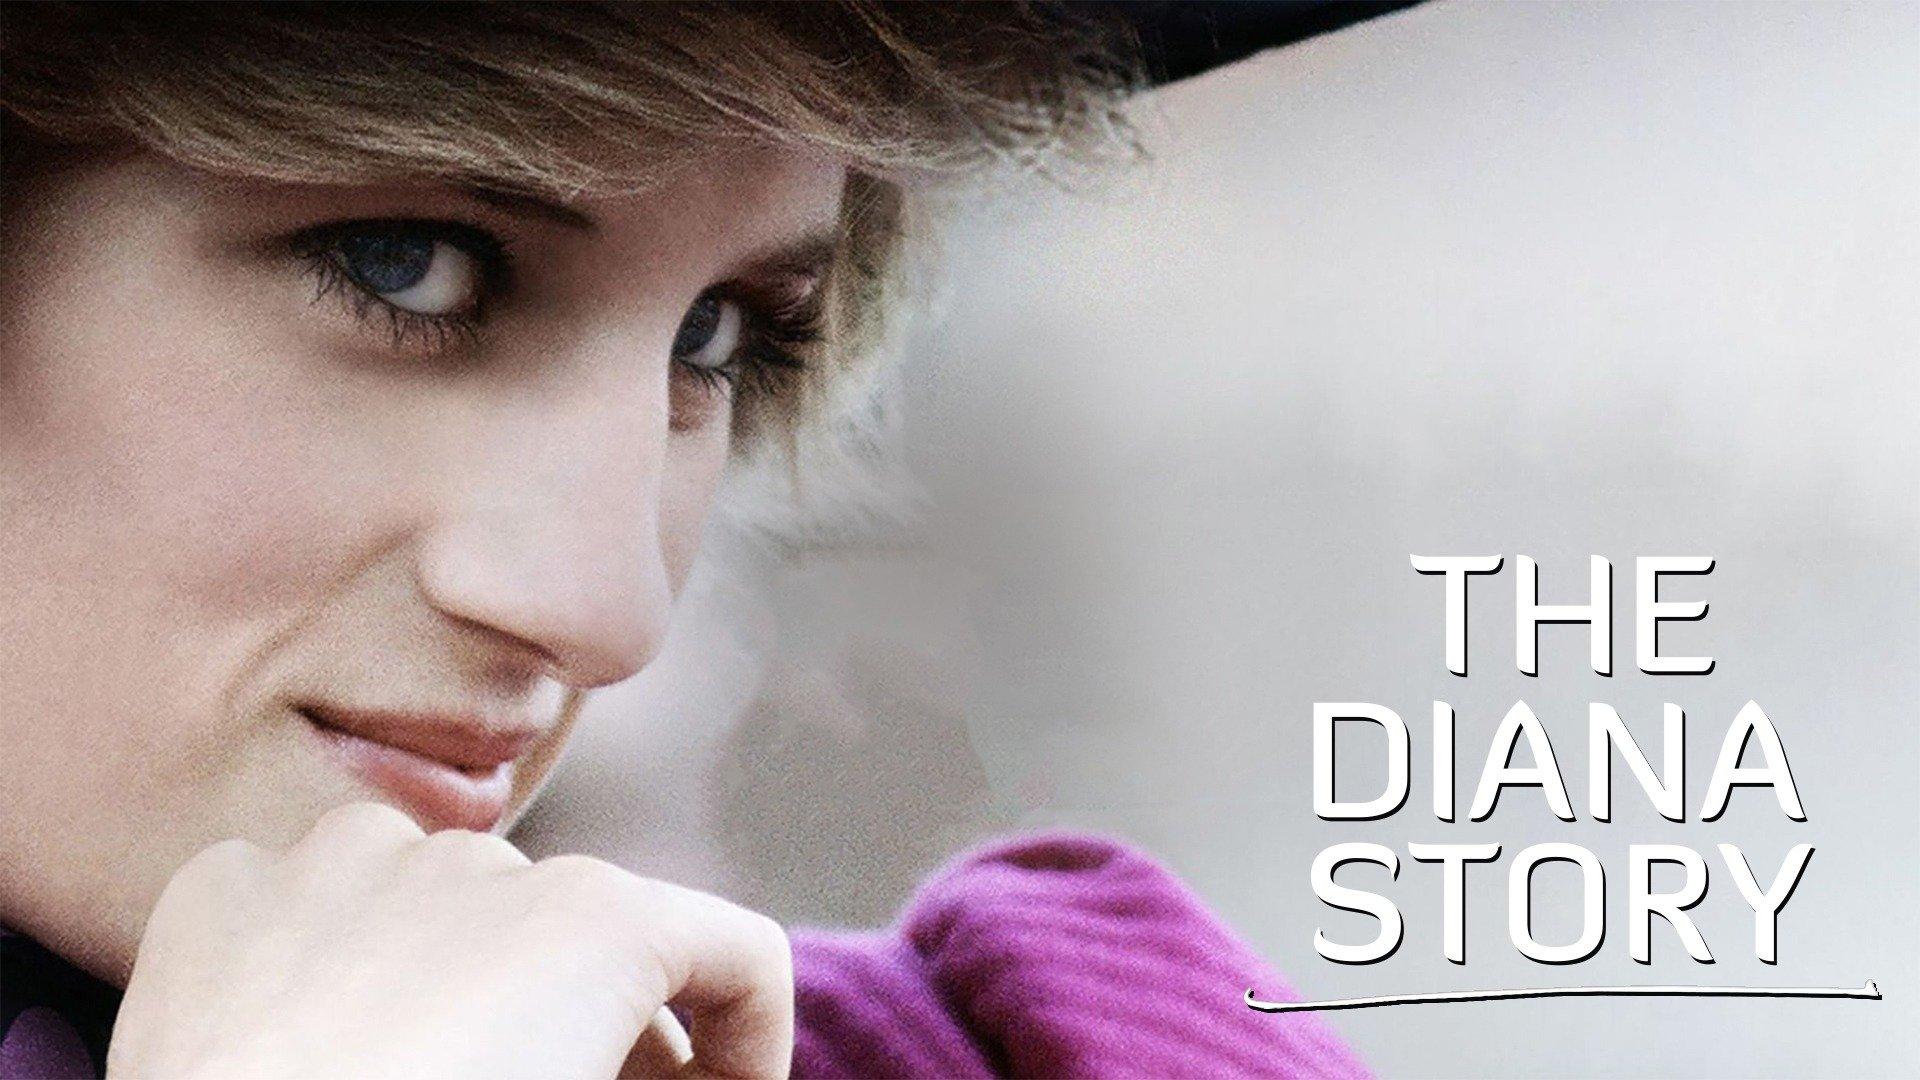 Watch The Diana Story Streaming Online on Philo (Free Trial)